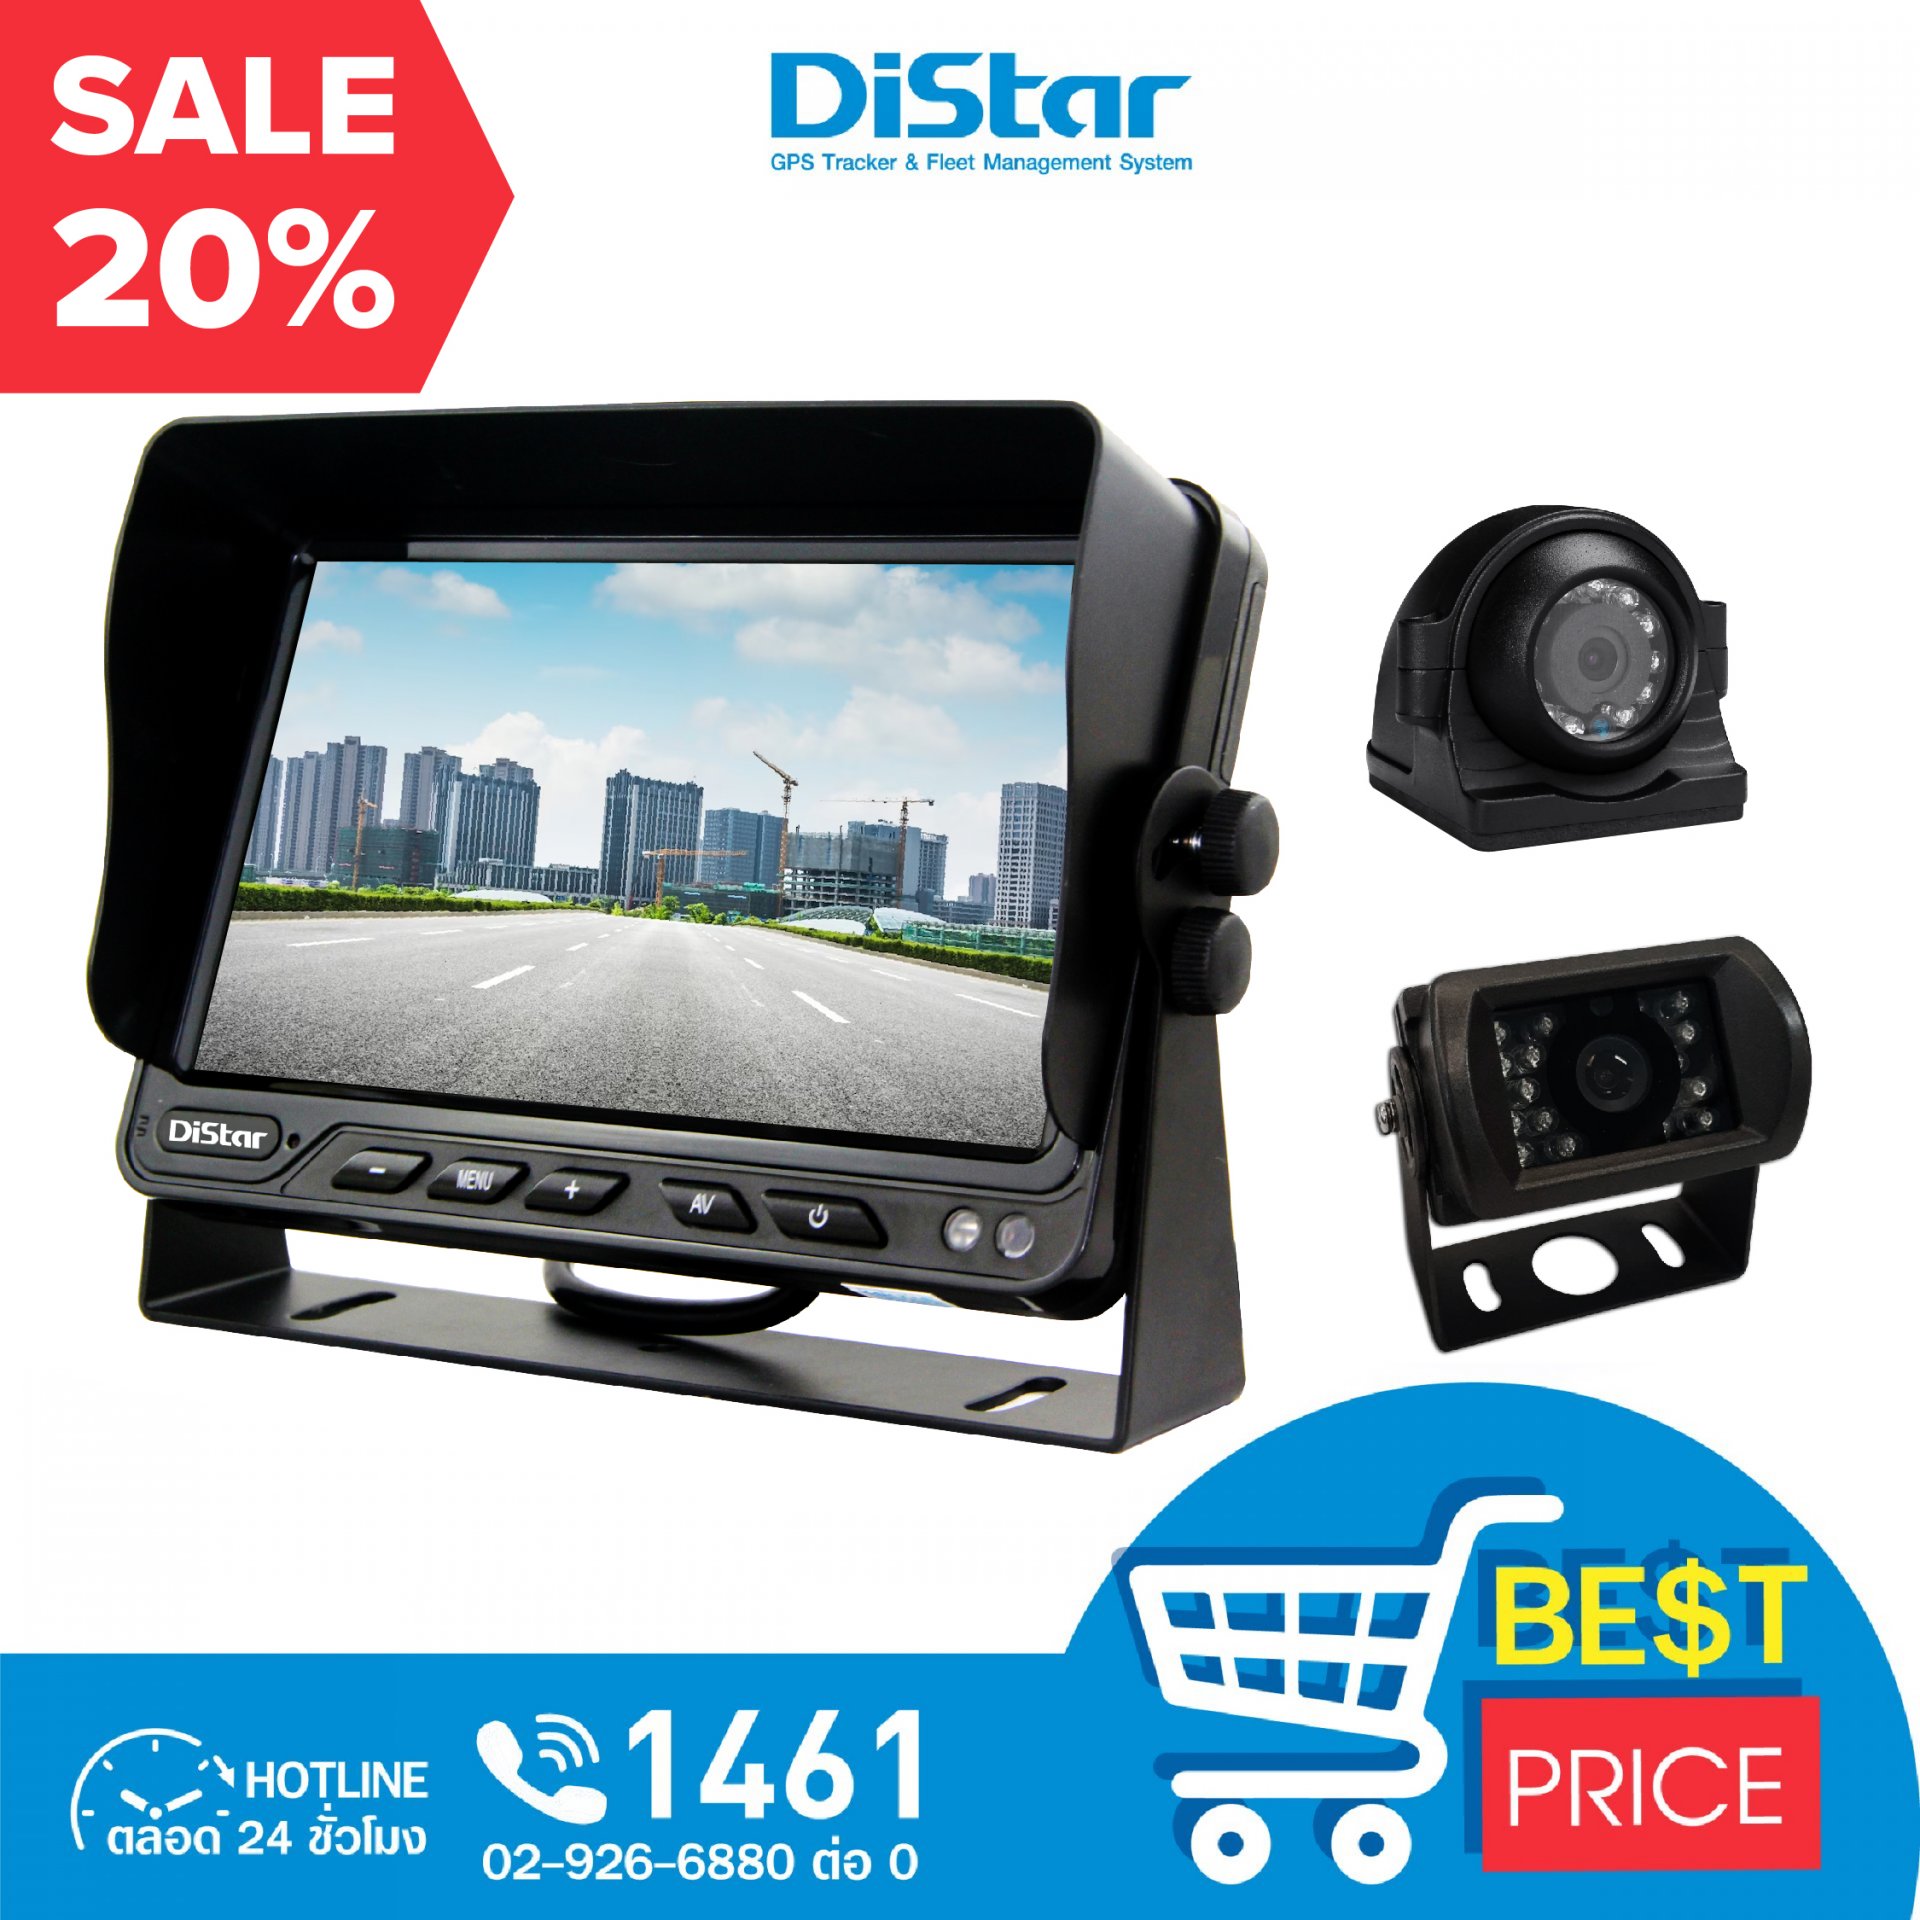 Distar, front-rear recording camera set, 7-inch screen, 1024x600 pixel resolution, supports connecting 2 cameras, model MCR-712